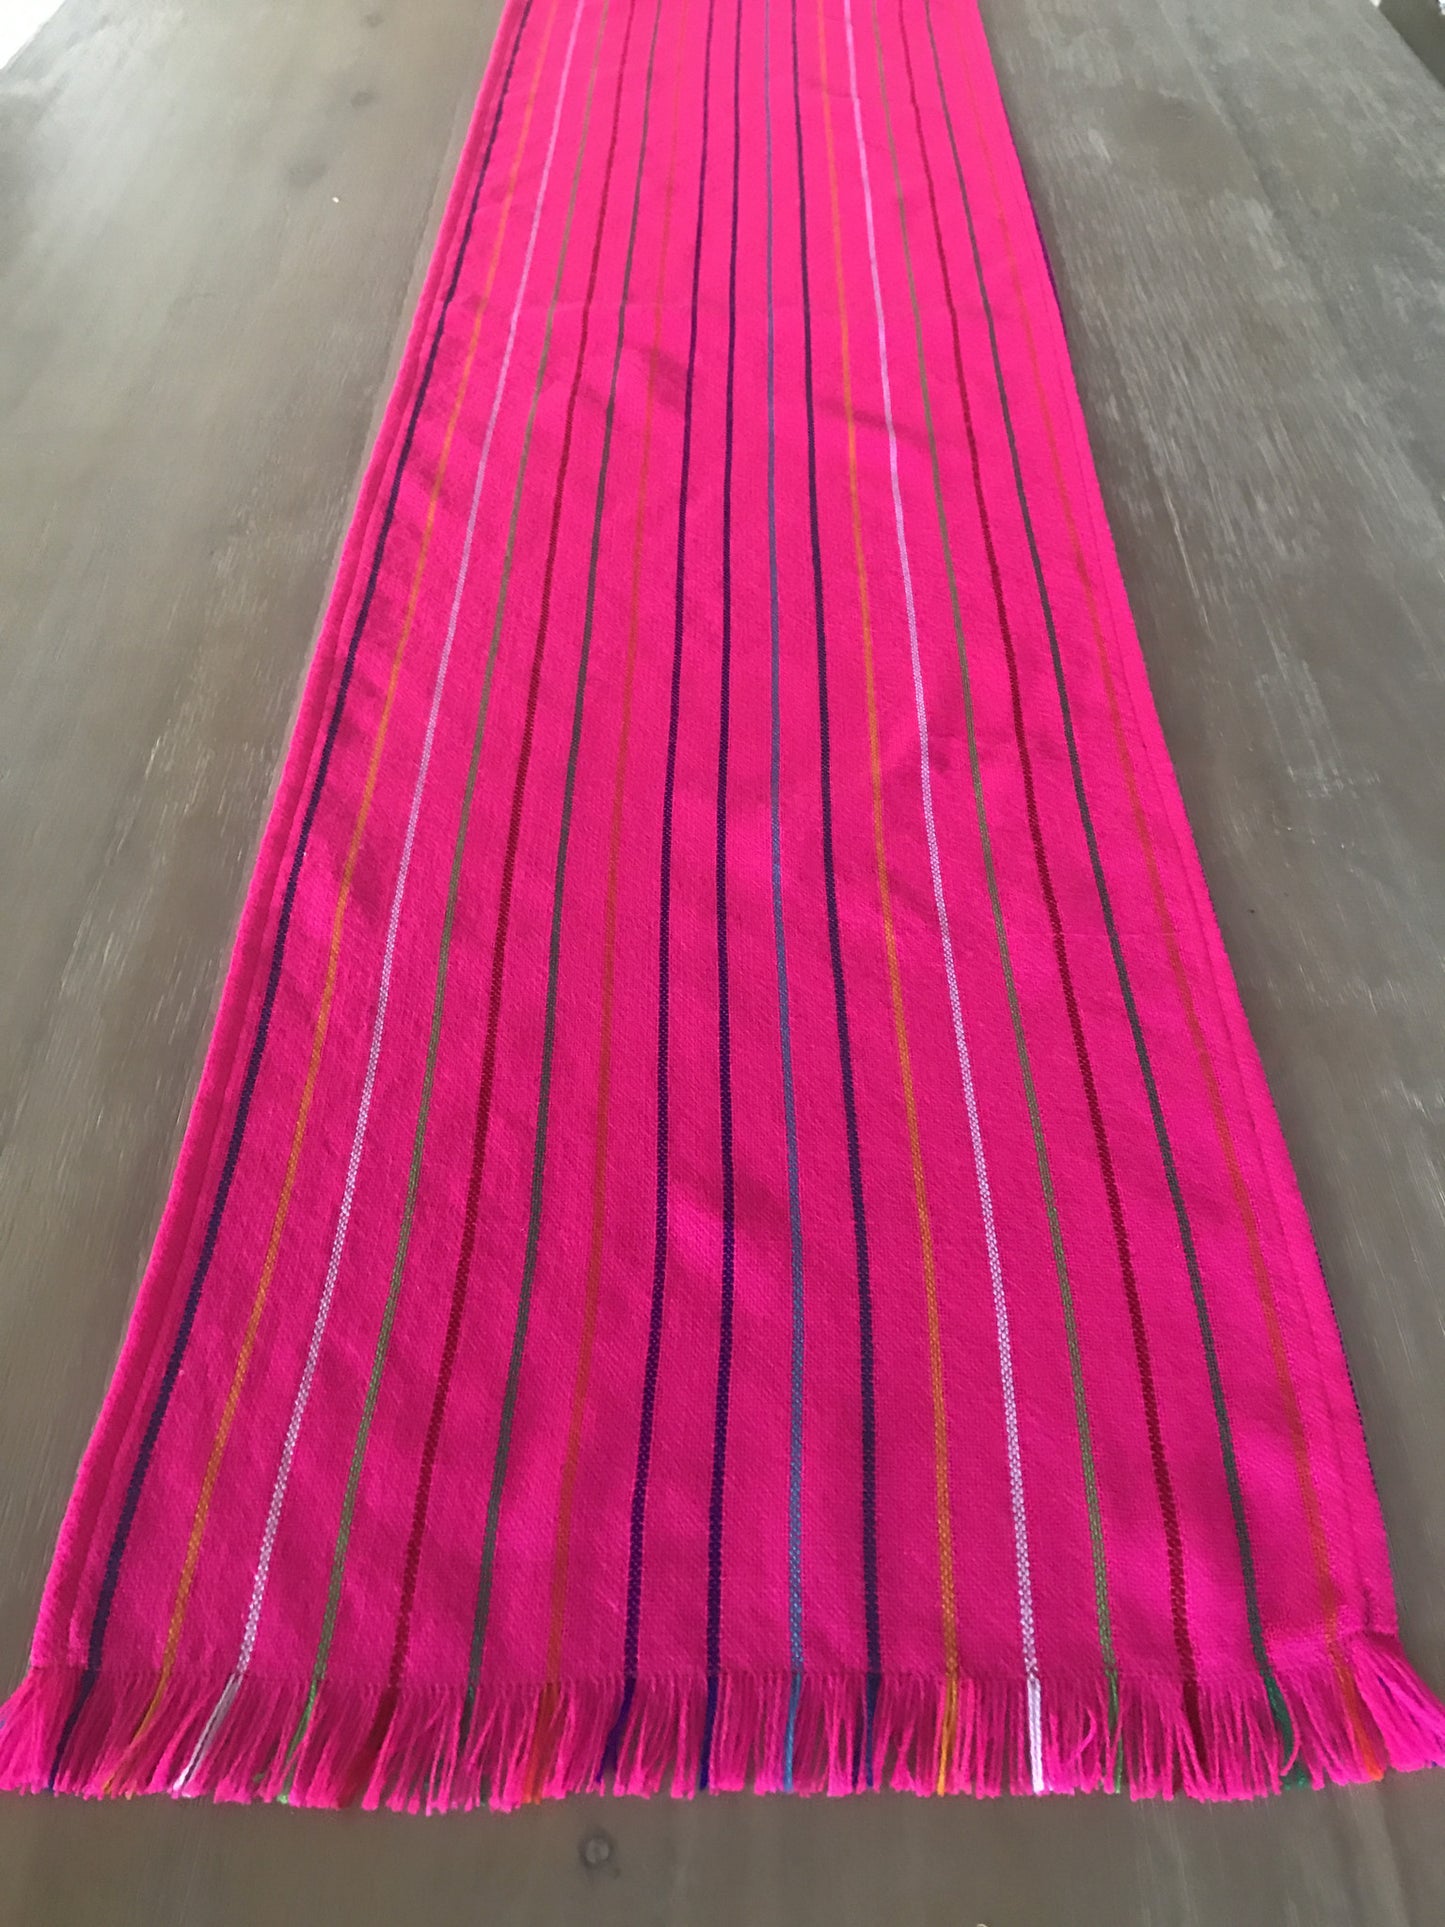 Mexican fabric Table Runner Colorful Pink stripes - MesaChic - 1